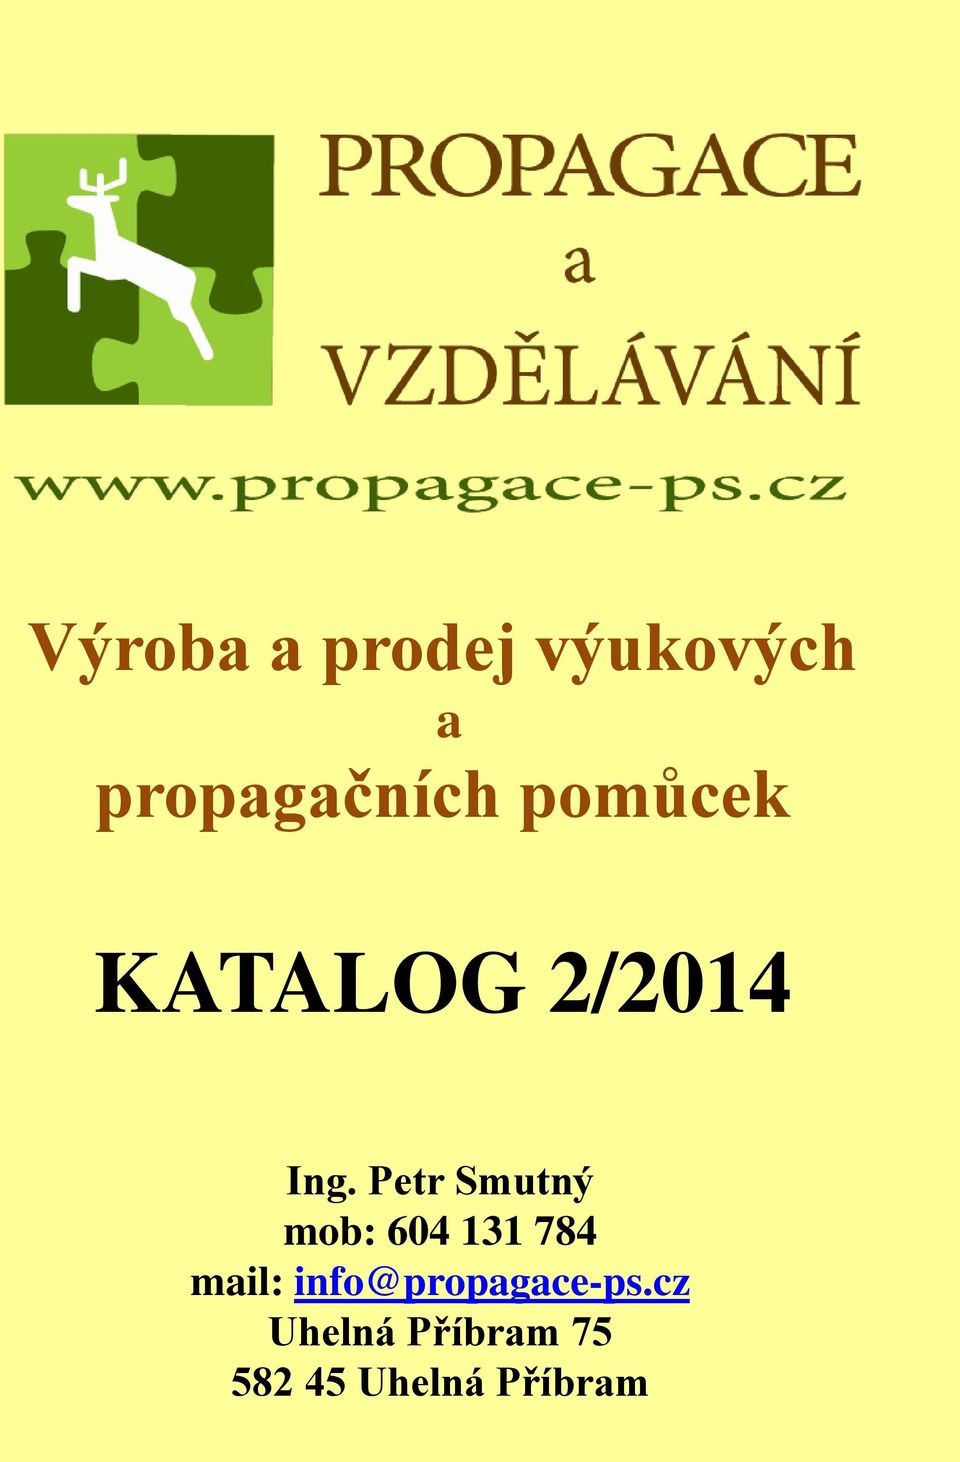 784 mil: info@propgce-ps.